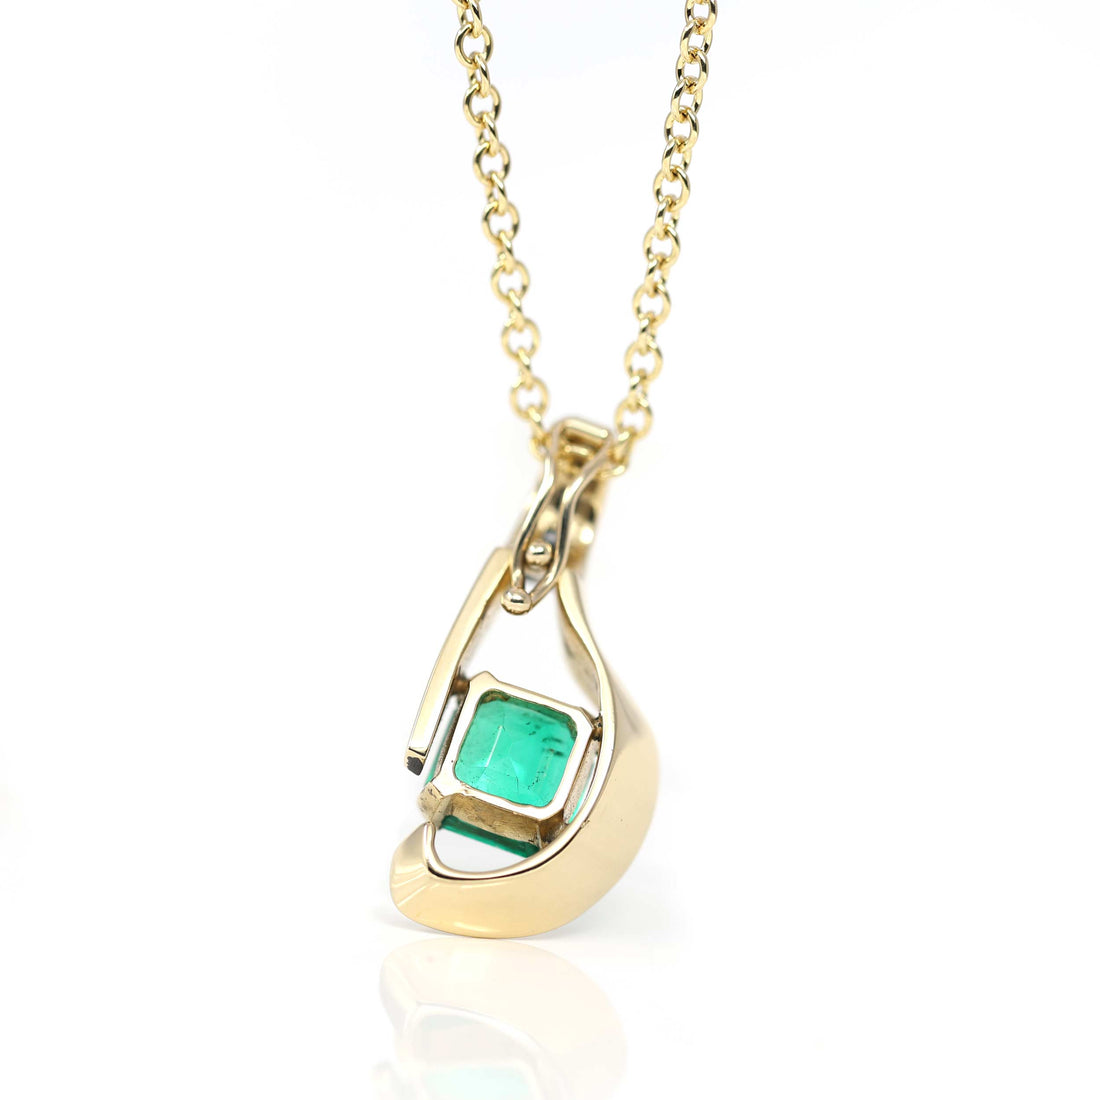 Baikalla Jewelry Gemstone Pendant Necklace 18k Yellow Gold Natural 4.23ct GIA Colombia Emerald Free From Necklace With Diamonds